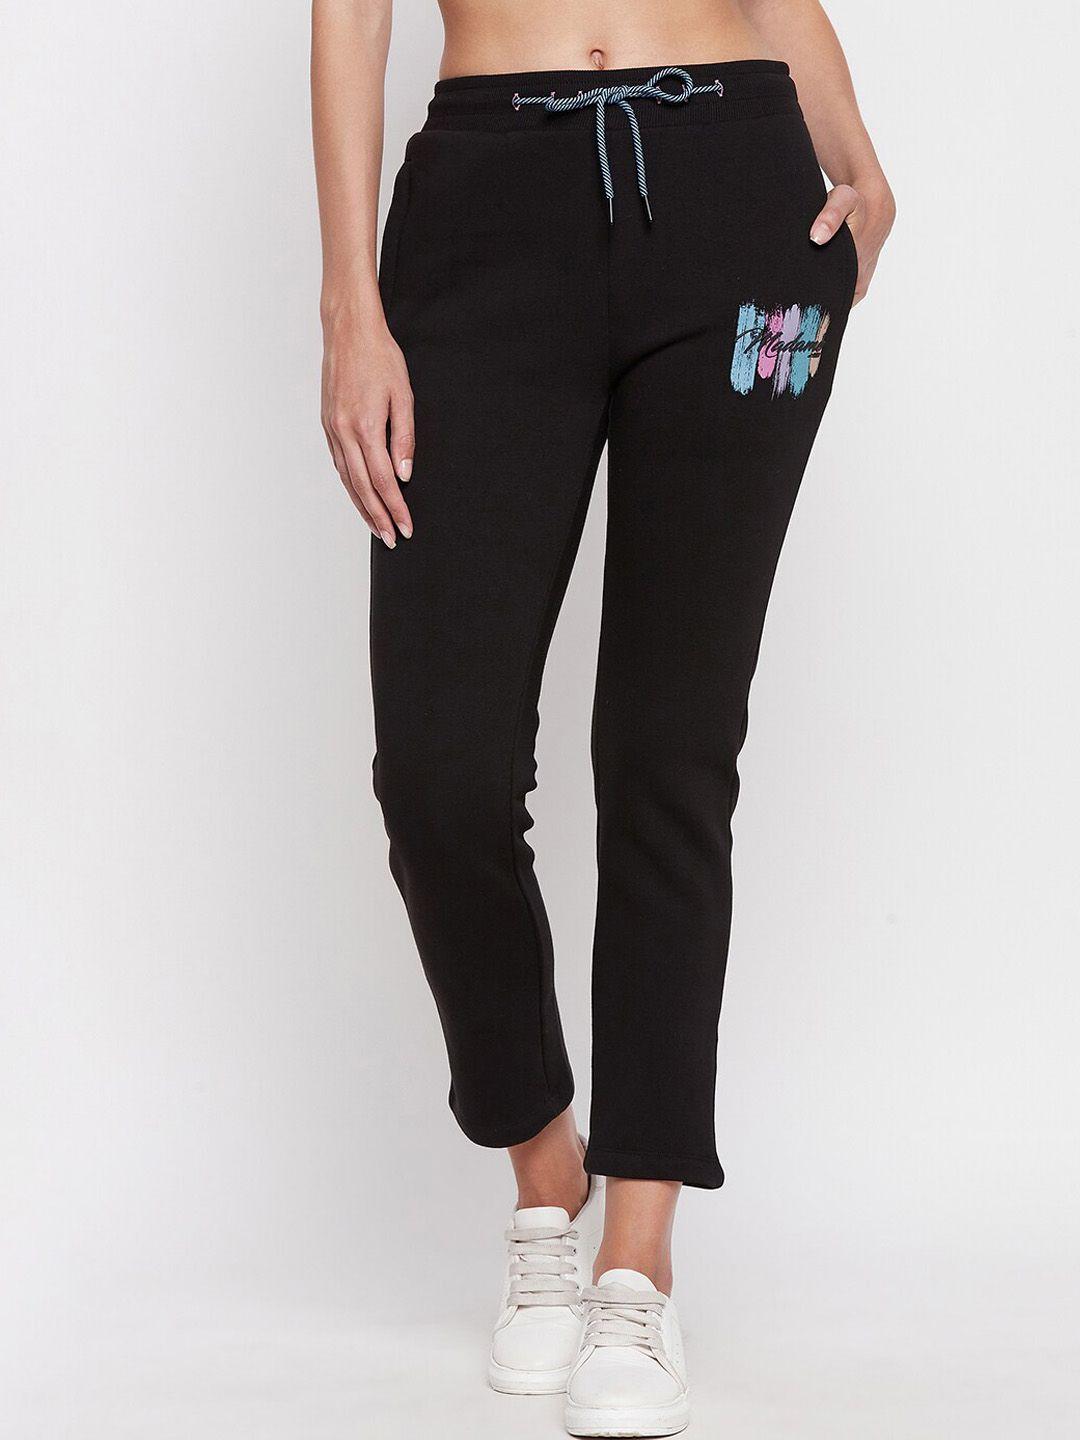 madame-women-typography-printed-pure-cotton-track-pants